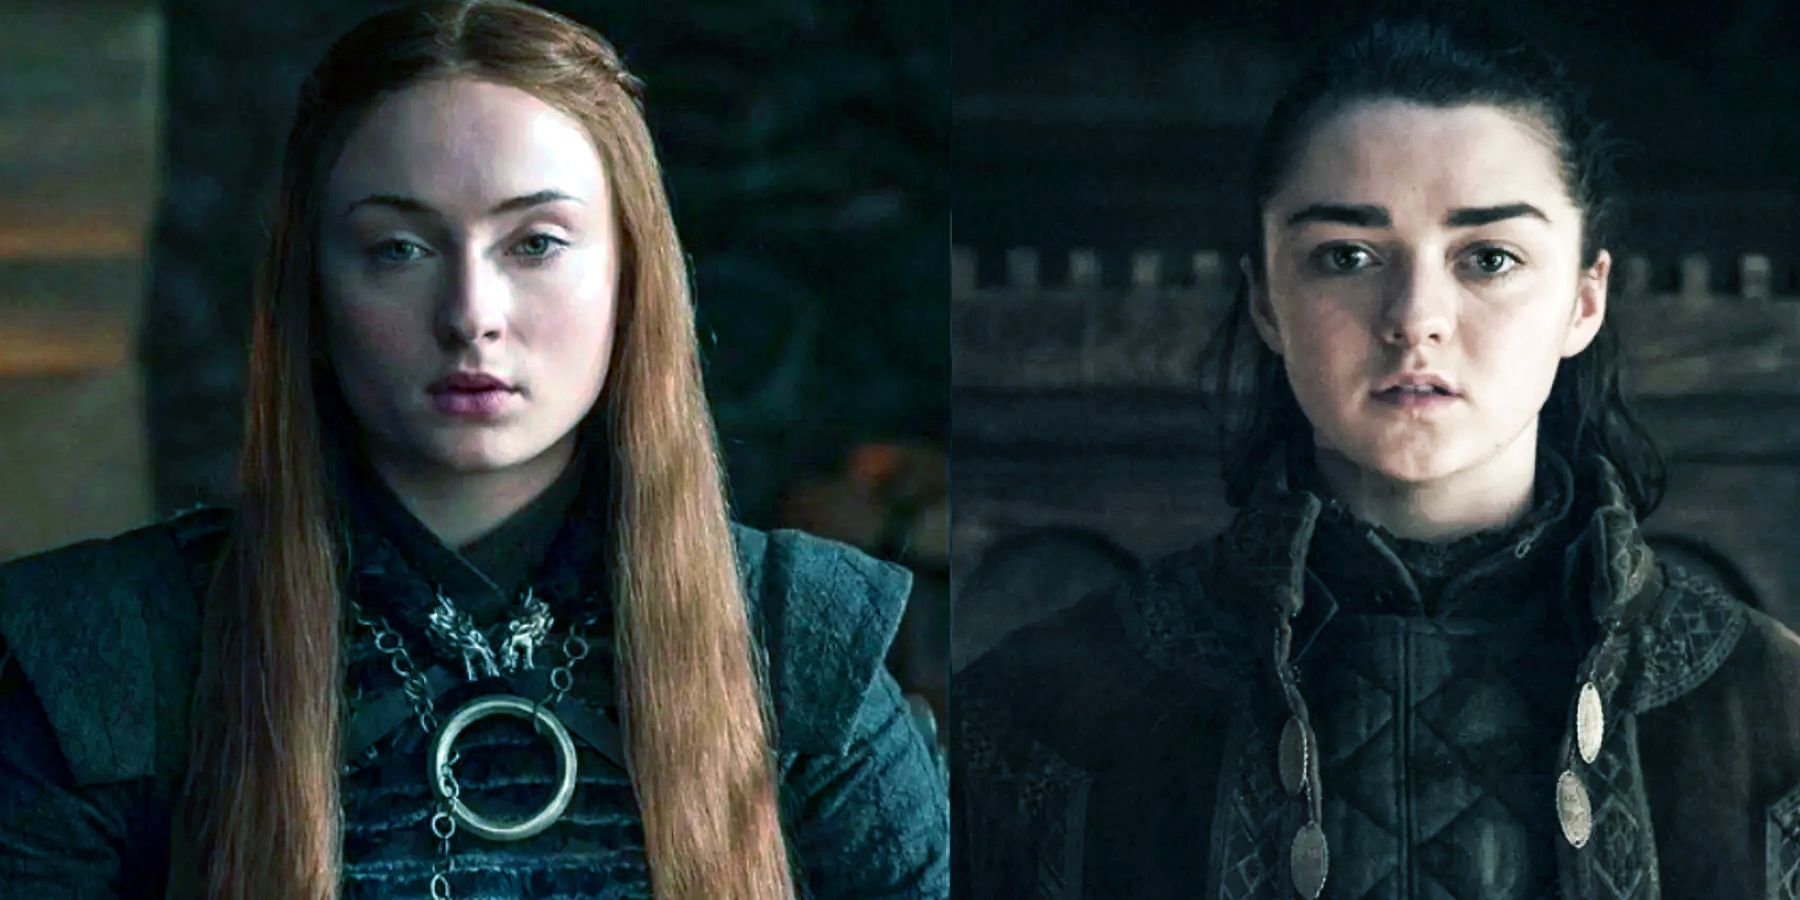 Sophie Turner Names The Game Of Thrones Co-Star She Is Still Very Close With, And It's Not Maisie Williams